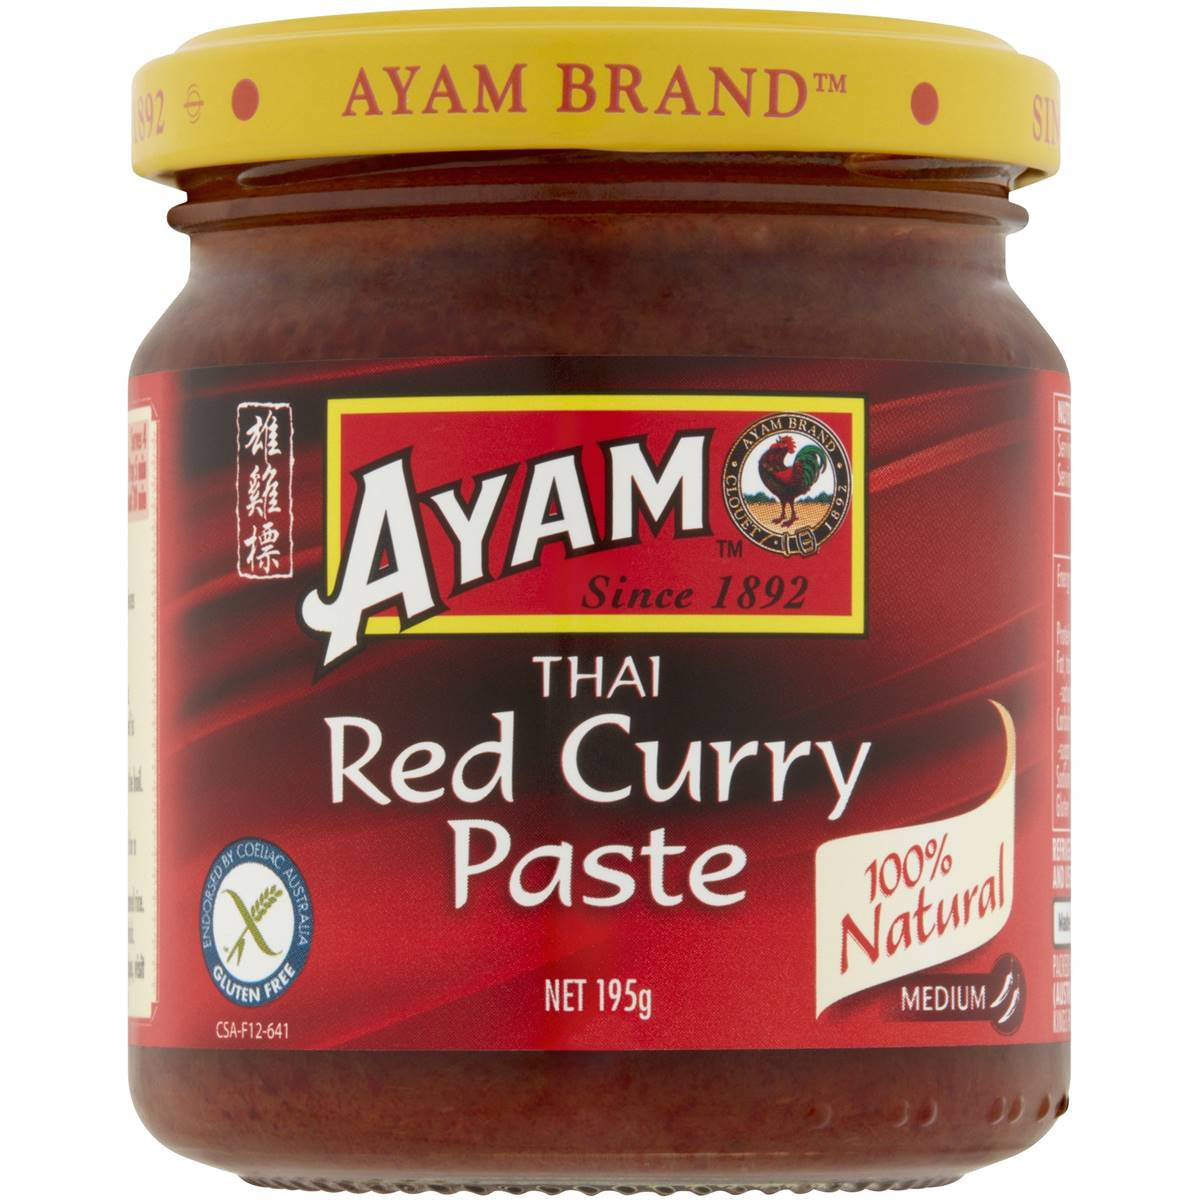 Ayam Thai Red Curry Paste 195g